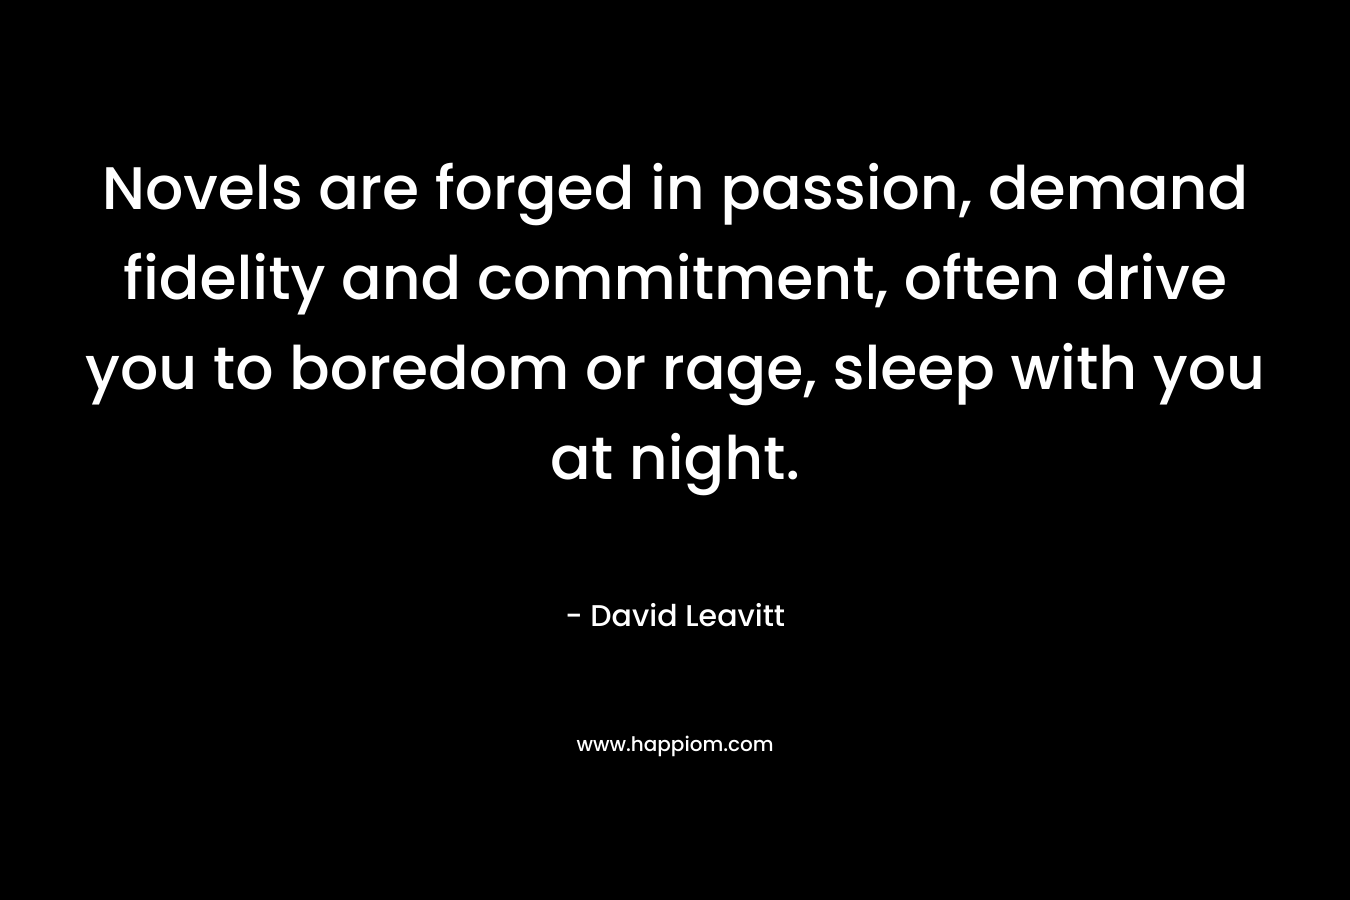 Novels are forged in passion, demand fidelity and commitment, often drive you to boredom or rage, sleep with you at night.